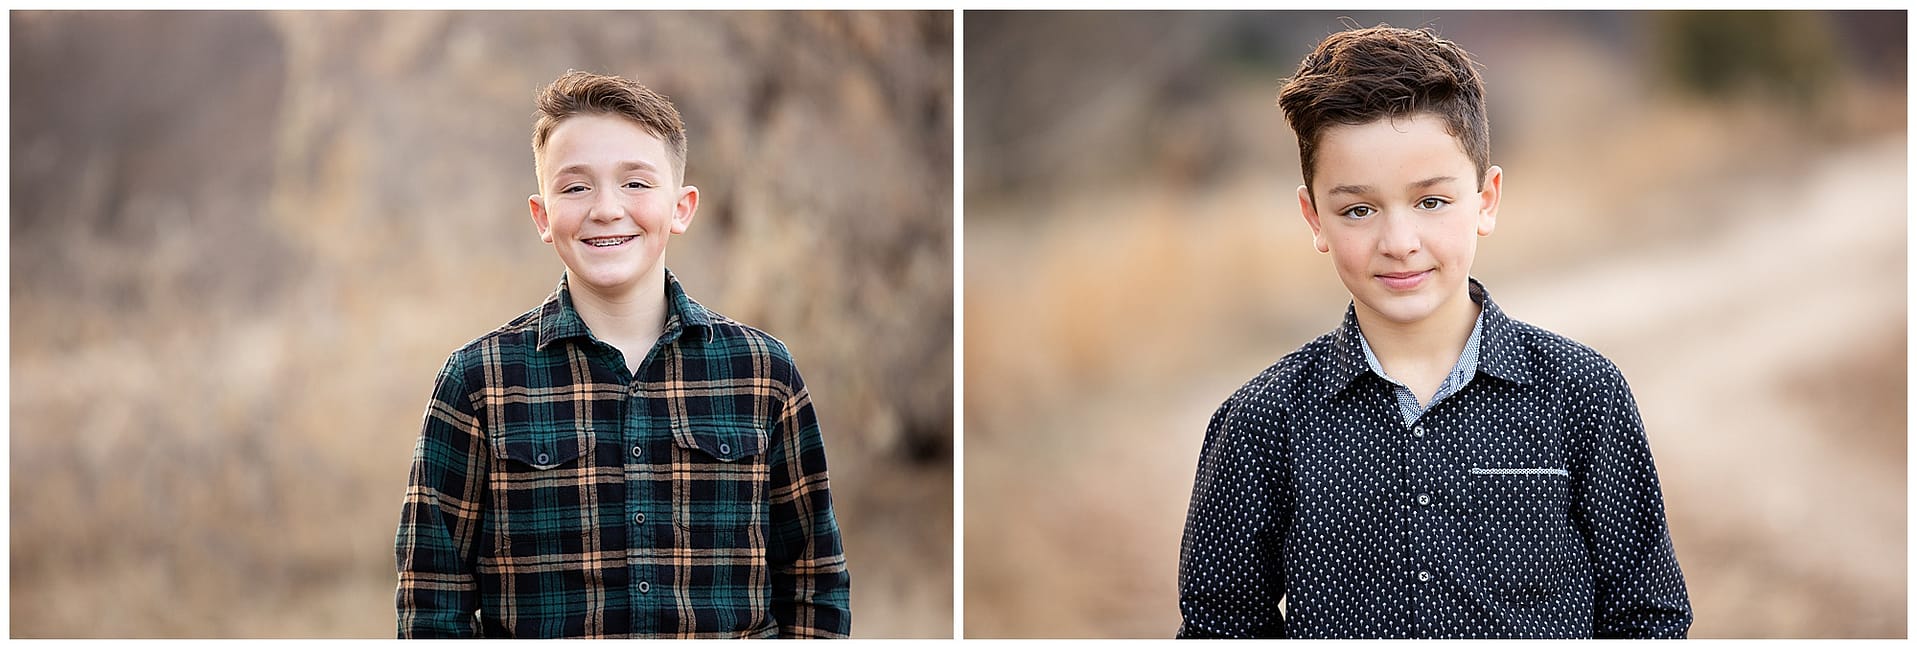 Children's outdoor portraits. Photos by Tiffany Hix Photography.